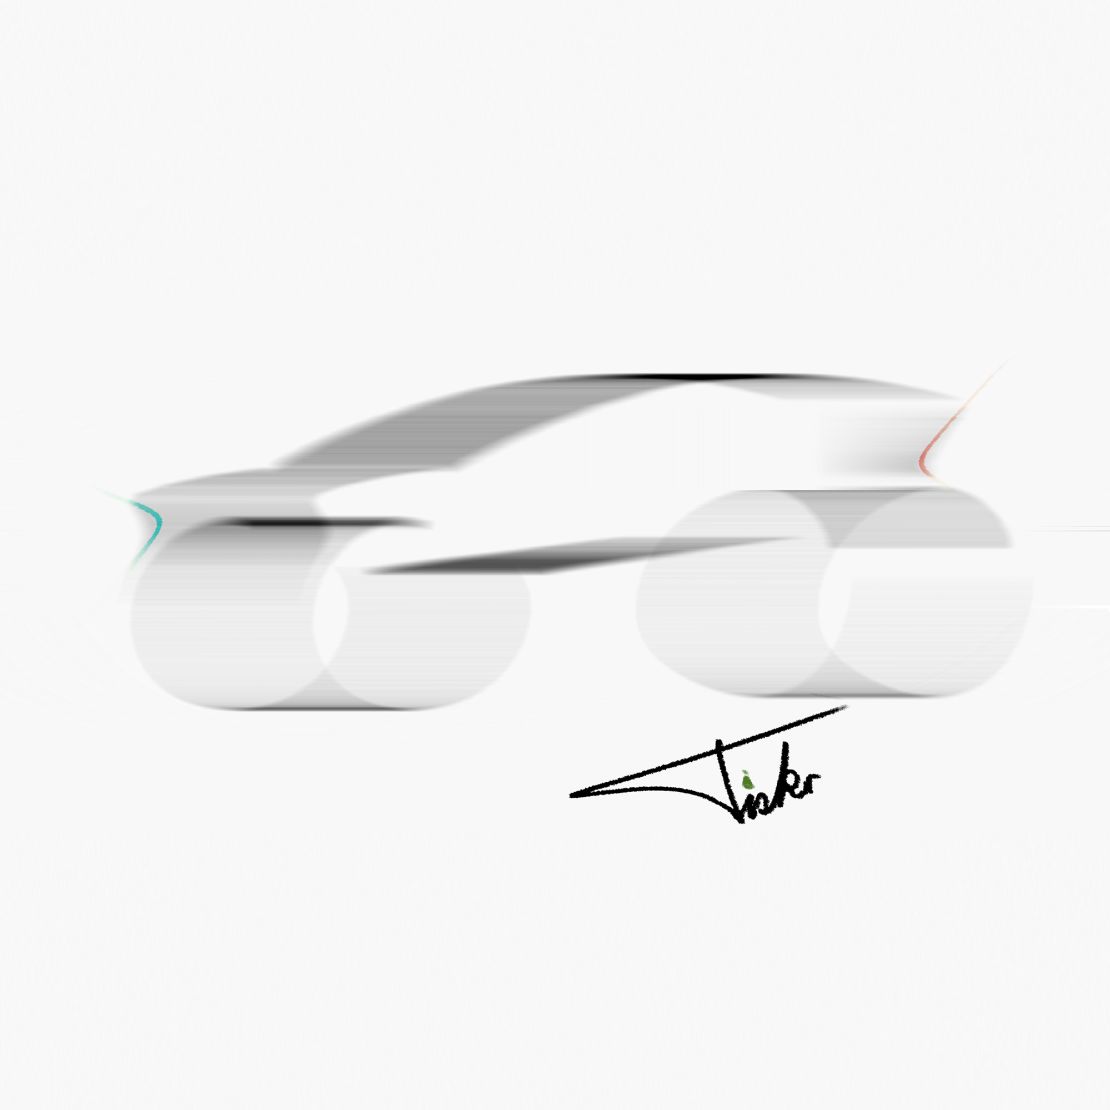 Fisker and Foxconn released this sketch of their proposed electric vehicle.